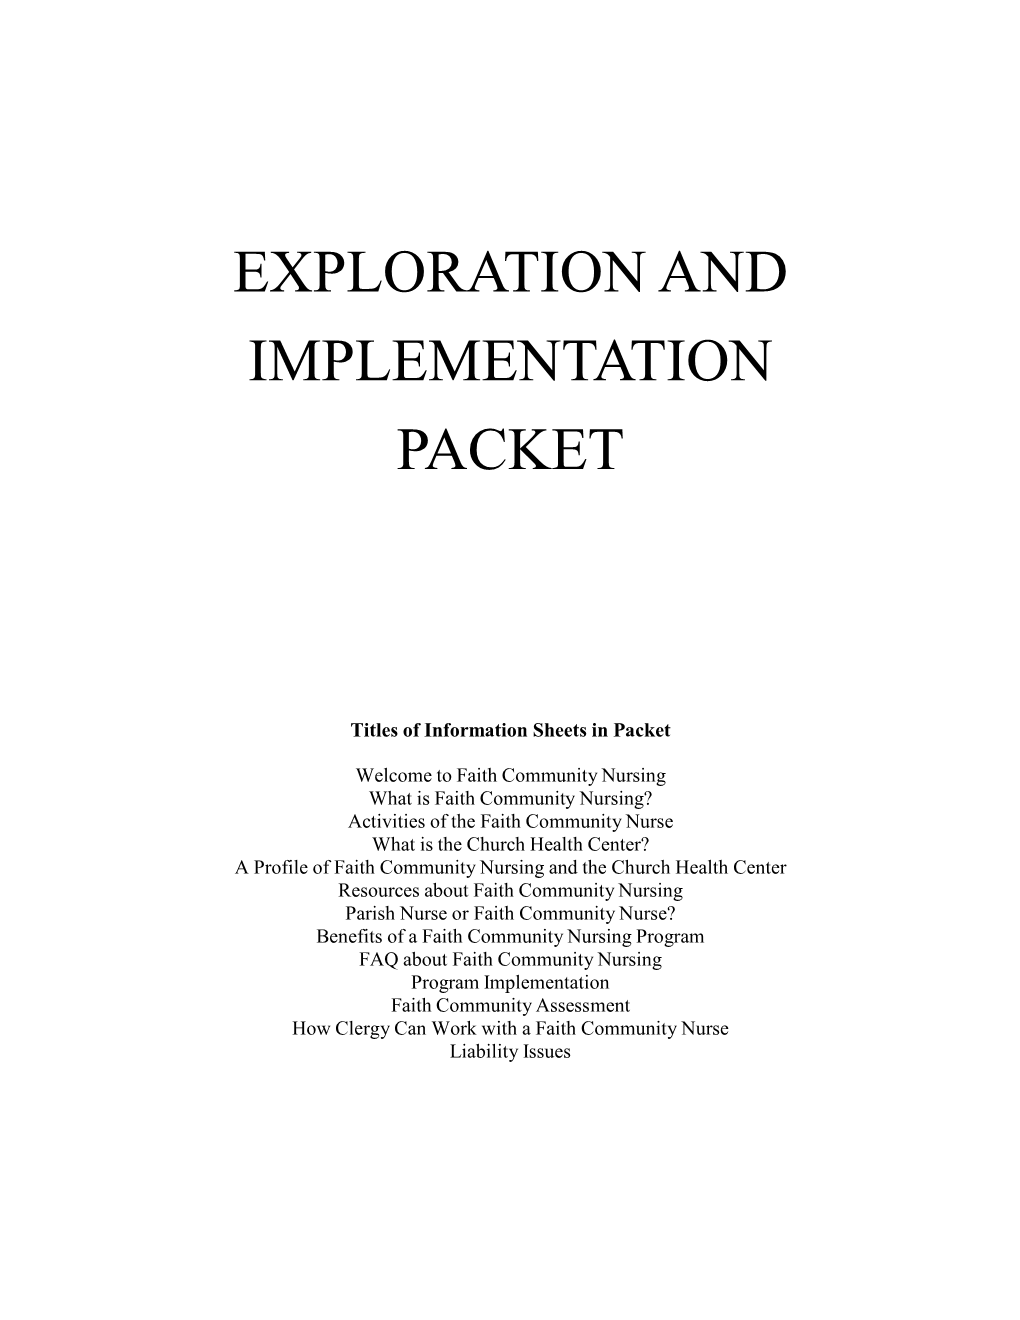 Exploration and Implementation Packet